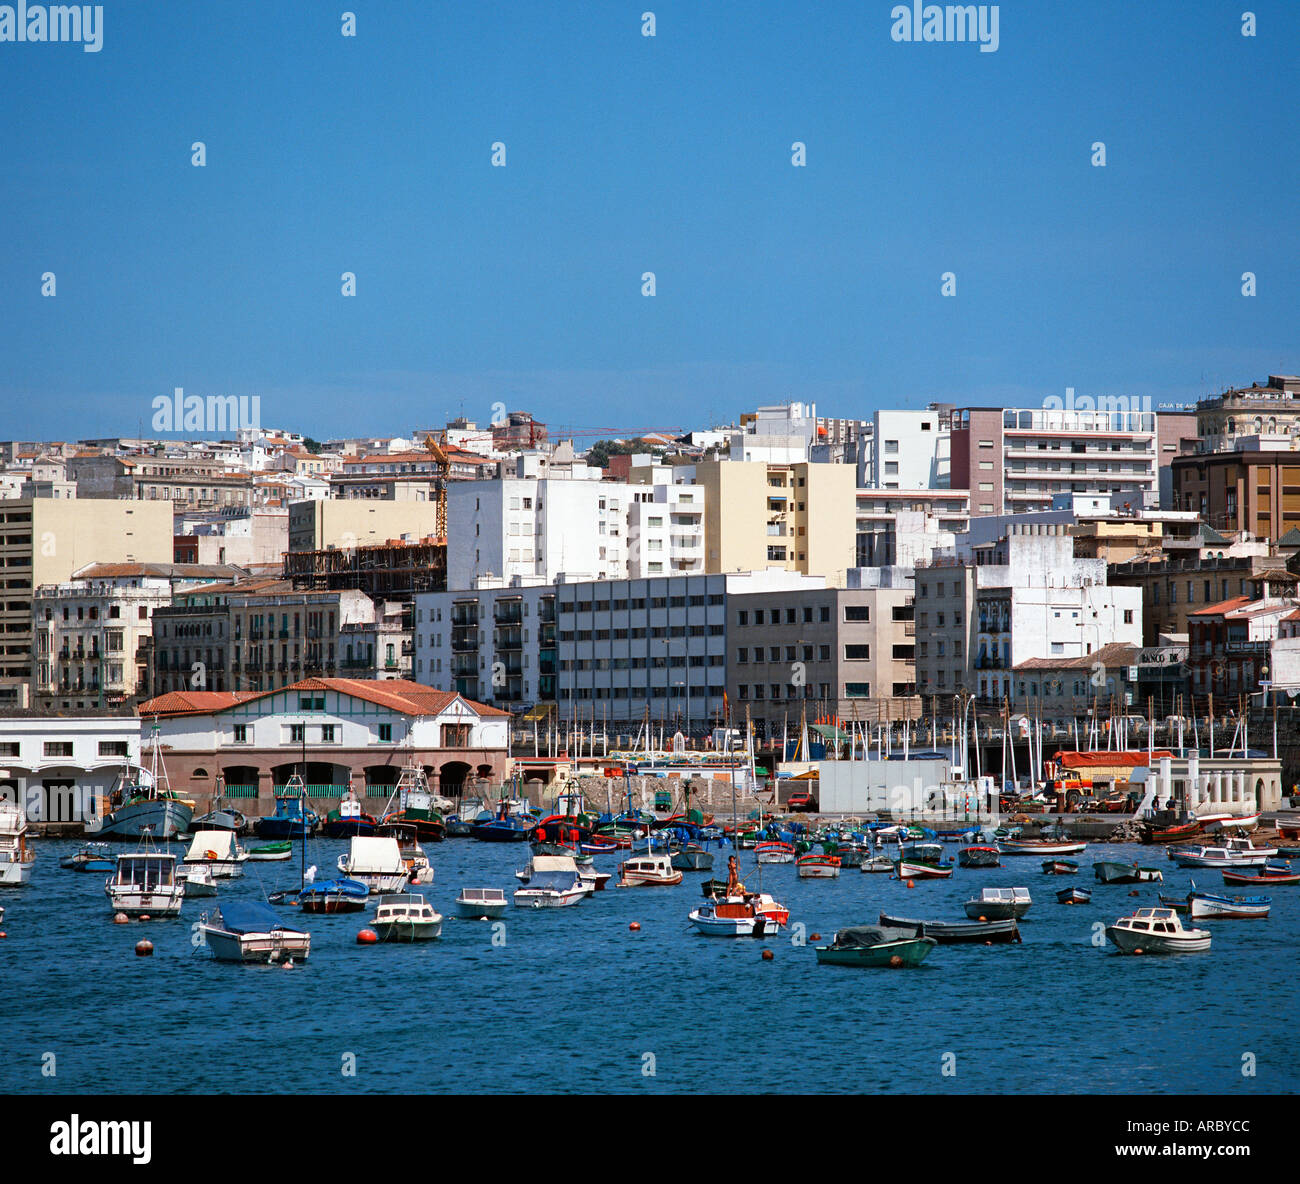 Ceuta In Morocco North Africa Belongs To Spain View Of The Harbour And The City Of Ceuta Stock Photo Alamy